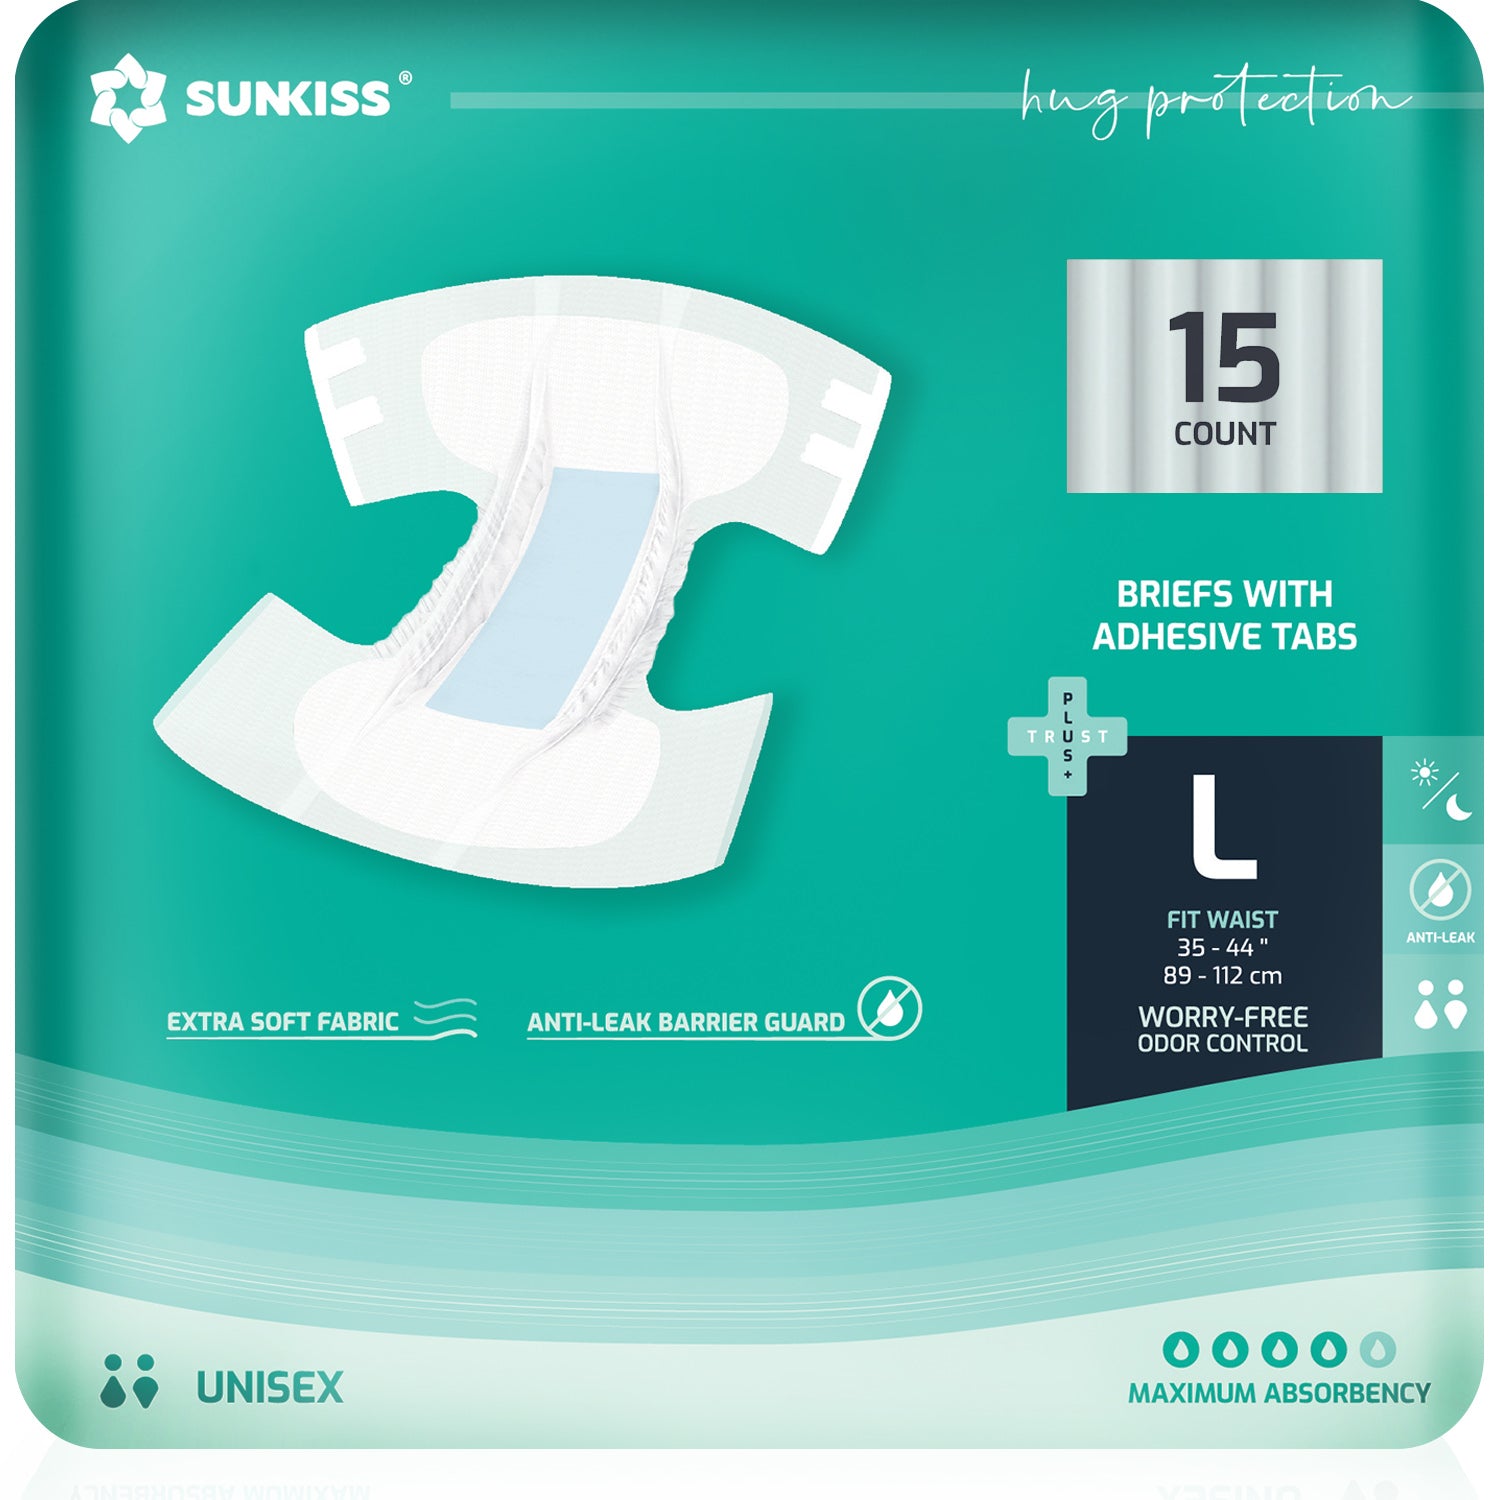 SUNKISS TrustPlus+ Unisex Adult Diapers with Maximum Absorbency